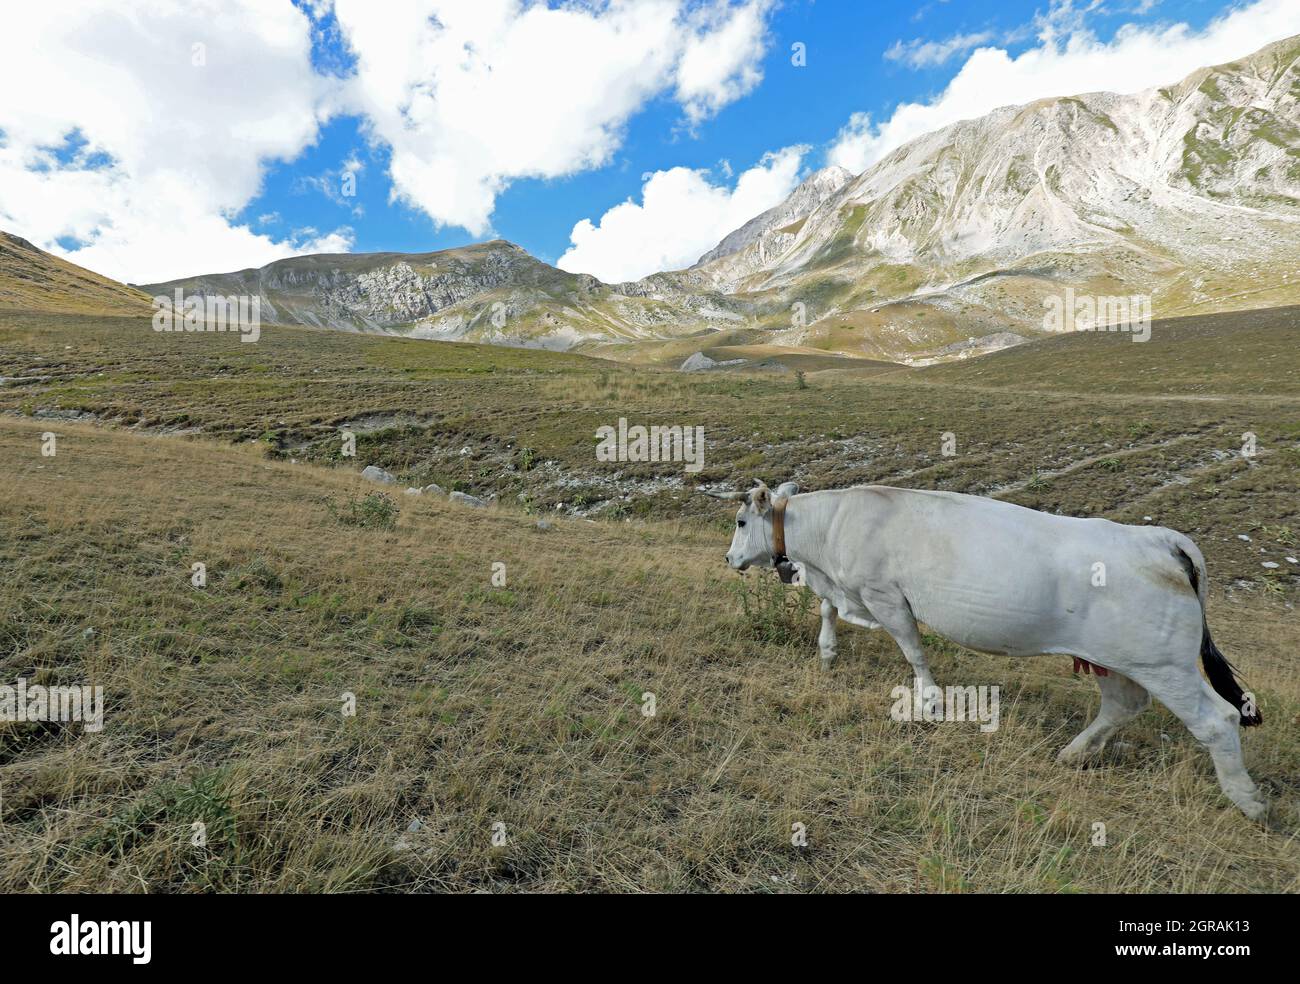 Big Fat White Cow Grazing On High Mountain Meadows In Summer Stock Photo